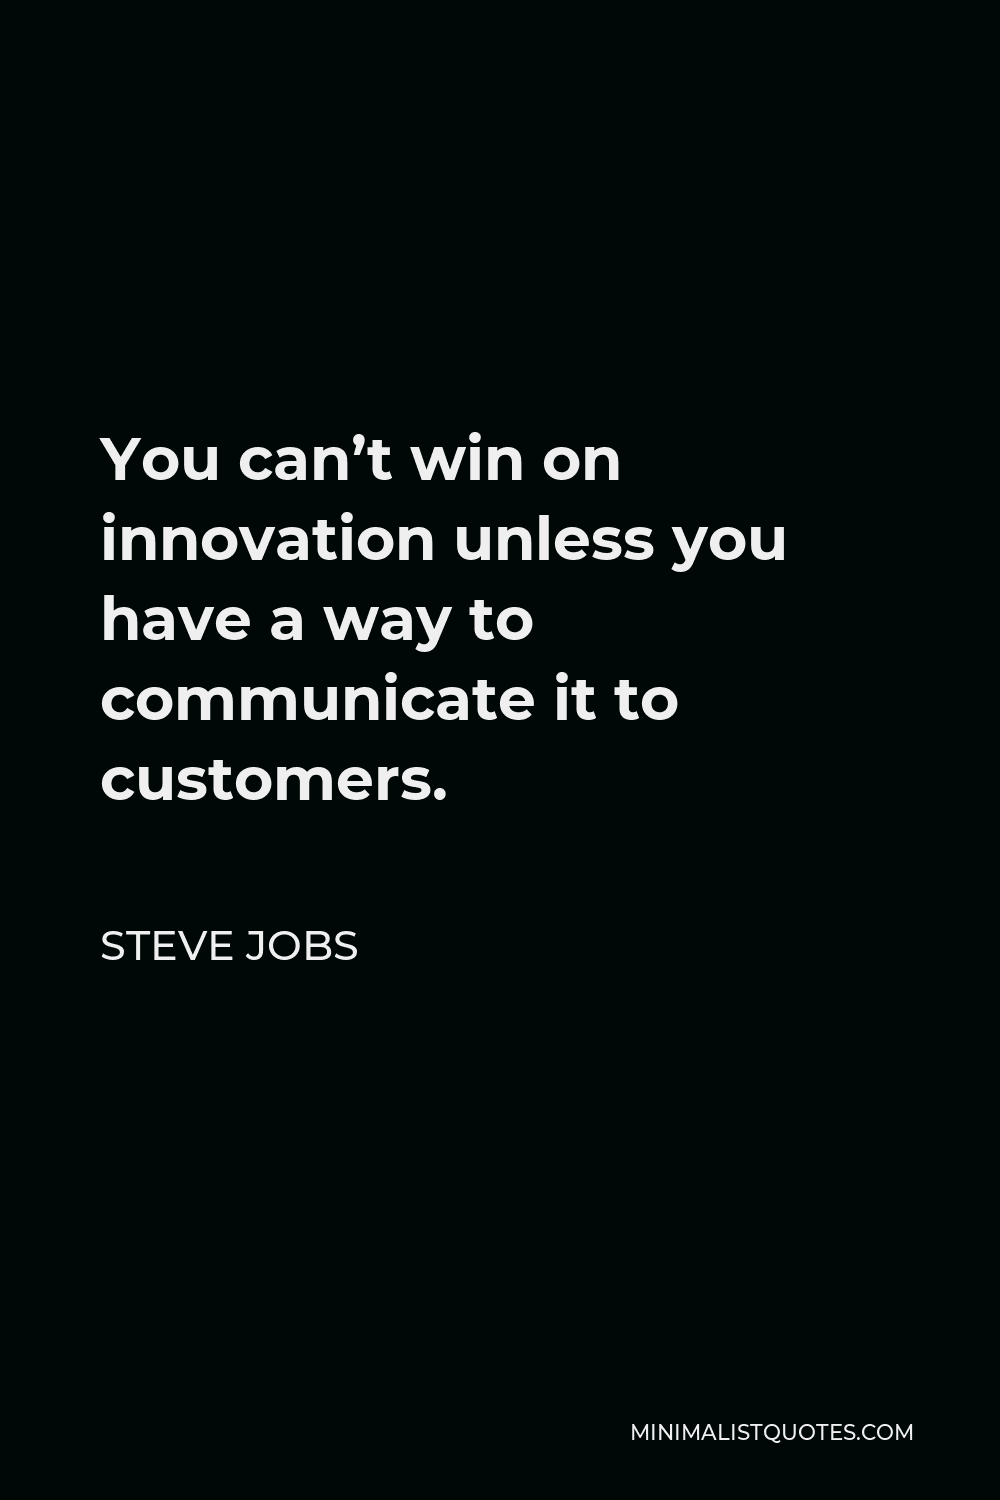 Steve Jobs Quote - You can’t win on innovation unless you have a way to communicate it to customers.